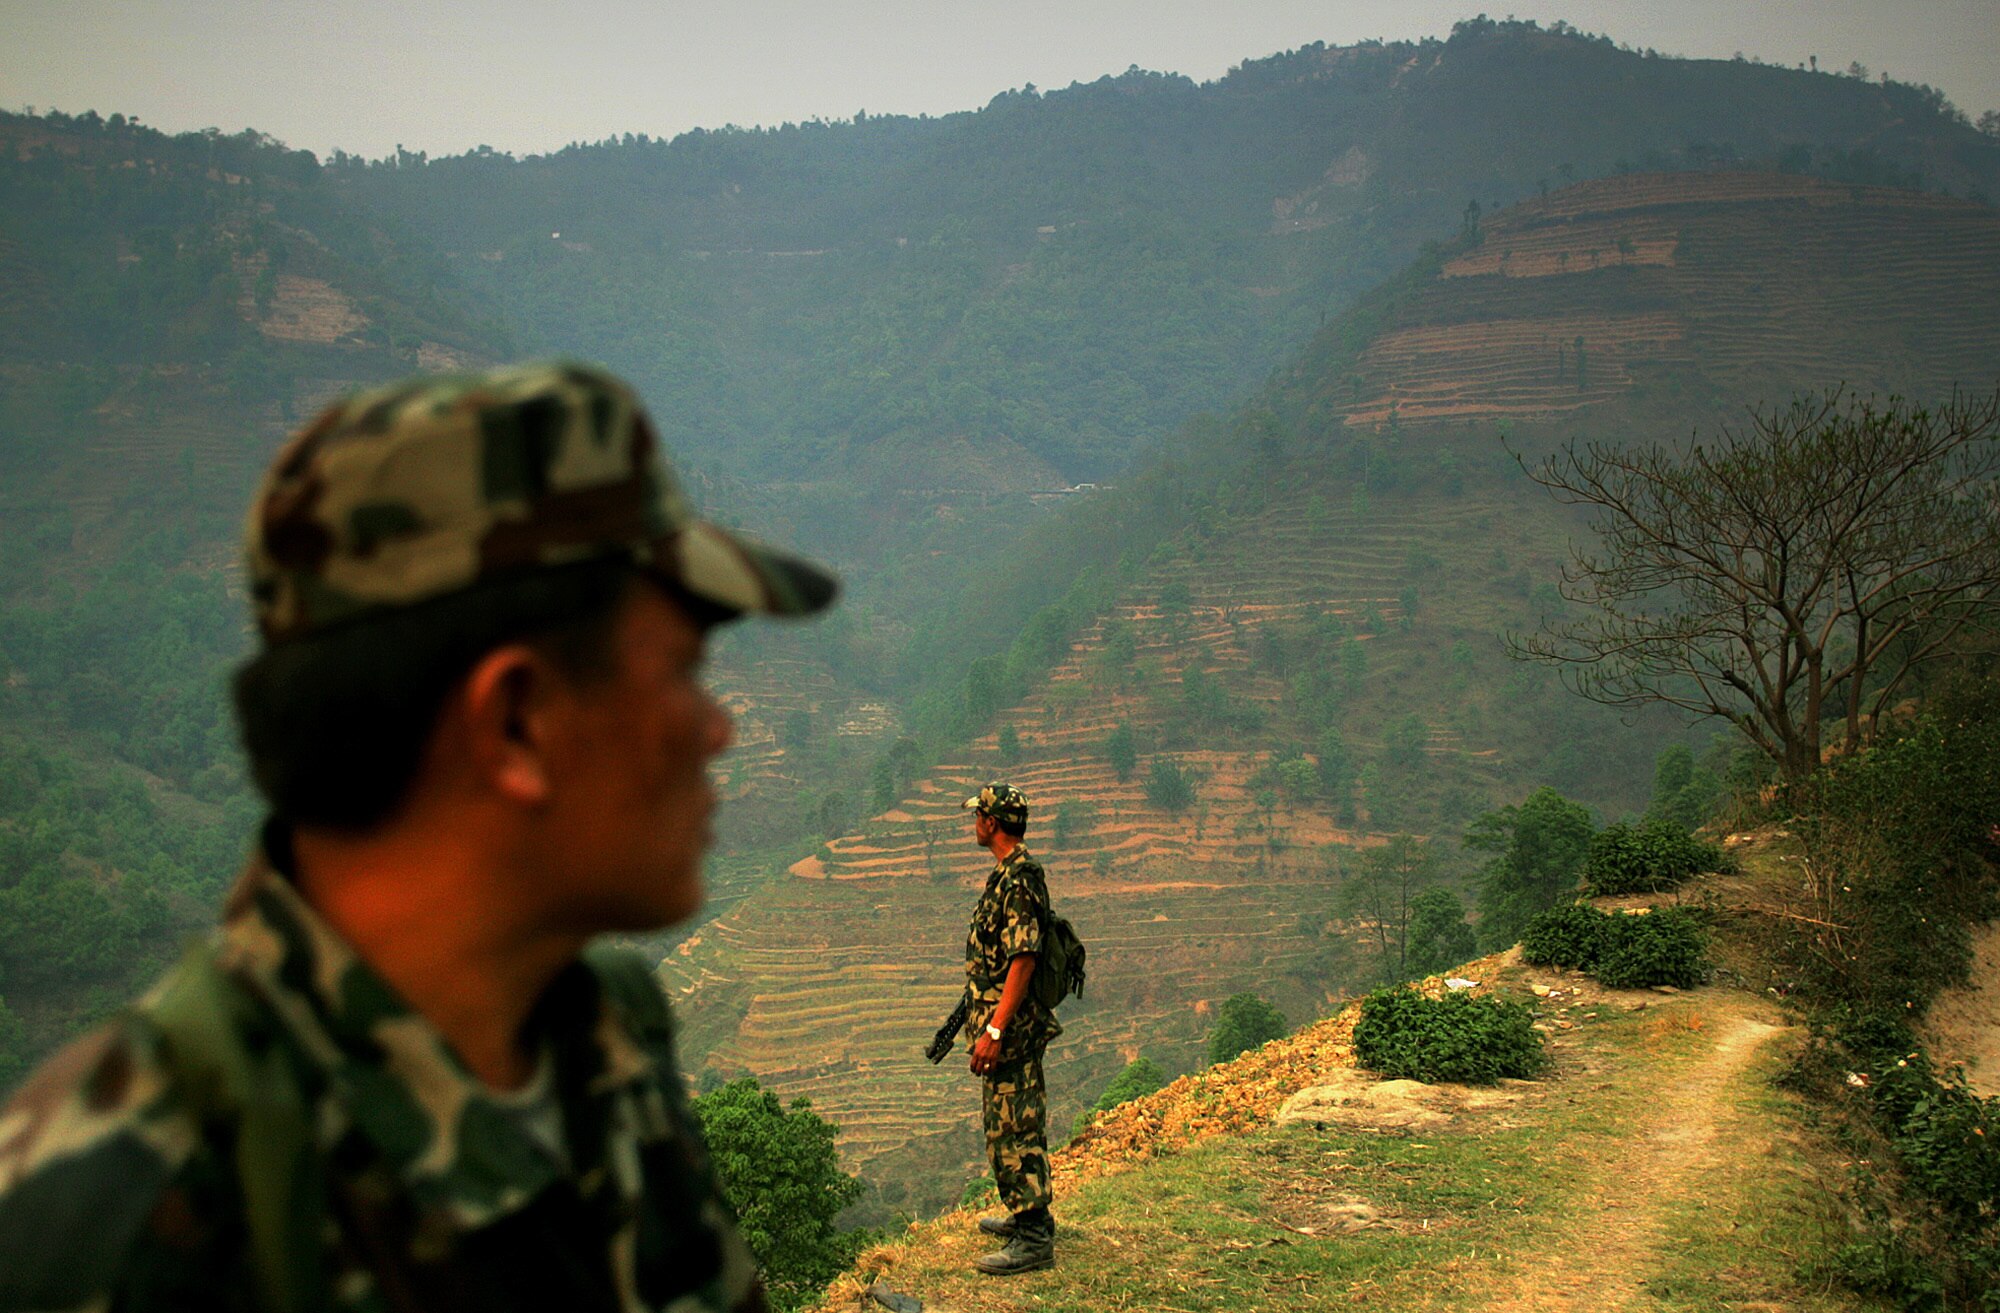 Nepali soldiers patrol a hilltop along a highway west of Kathmandu on the road leading to the border with neighboring India.